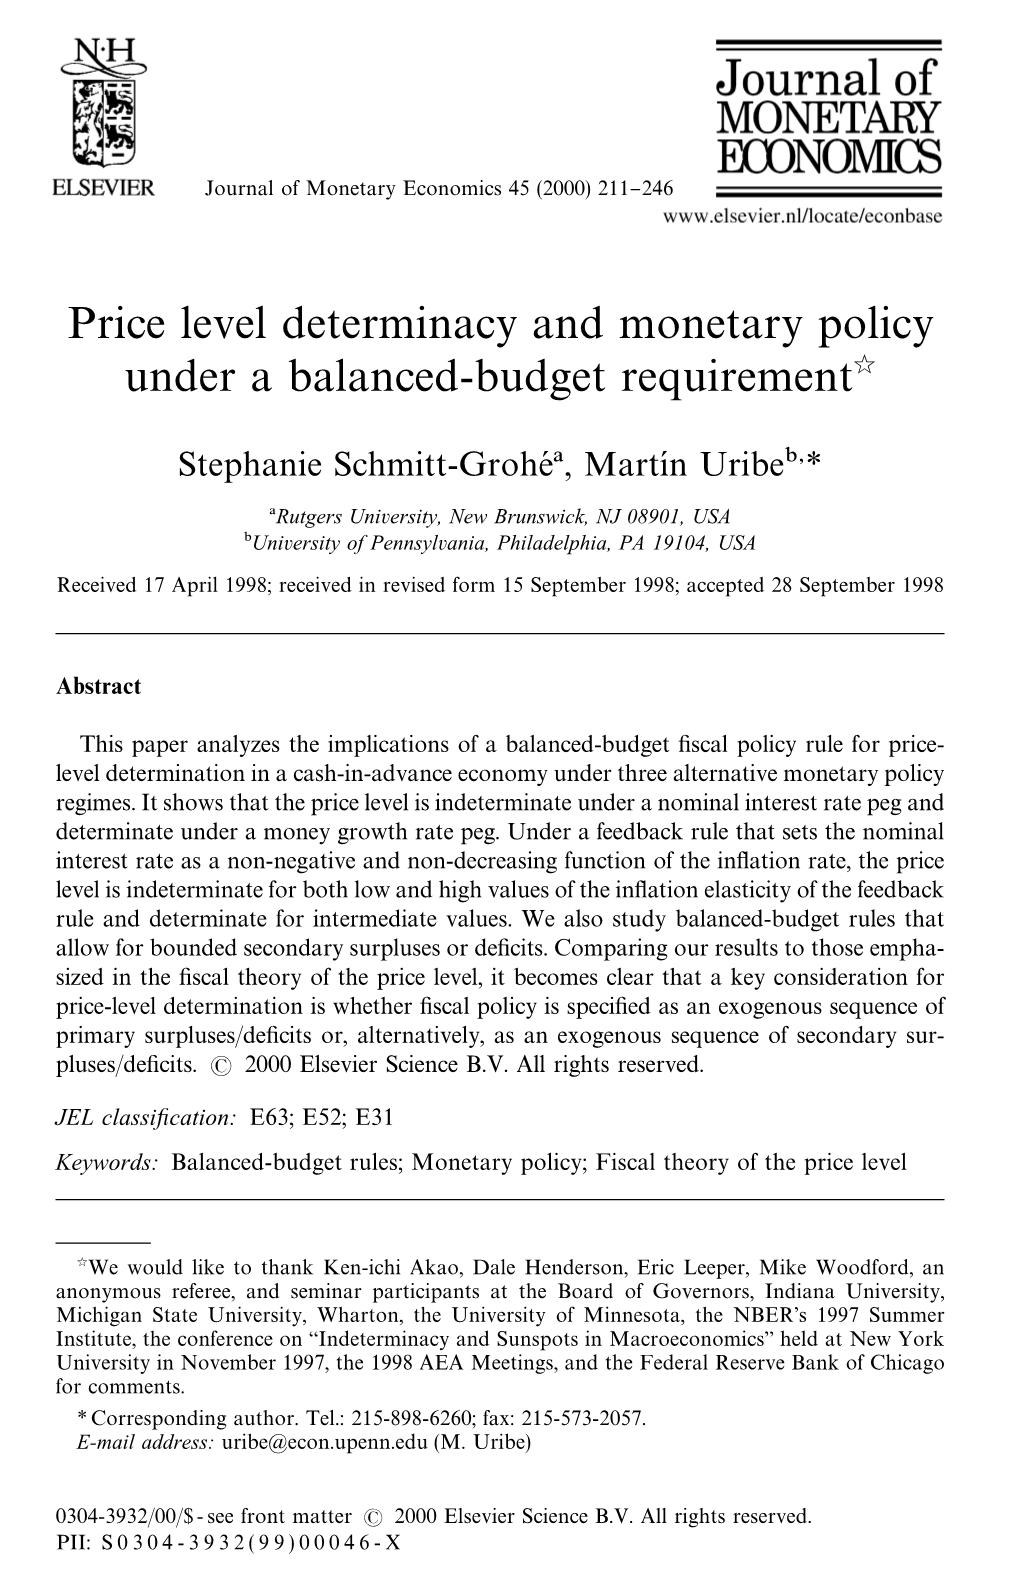 Price Level Determinacy and Monetary Policy Under a Balanced-Budget Requirementଝ